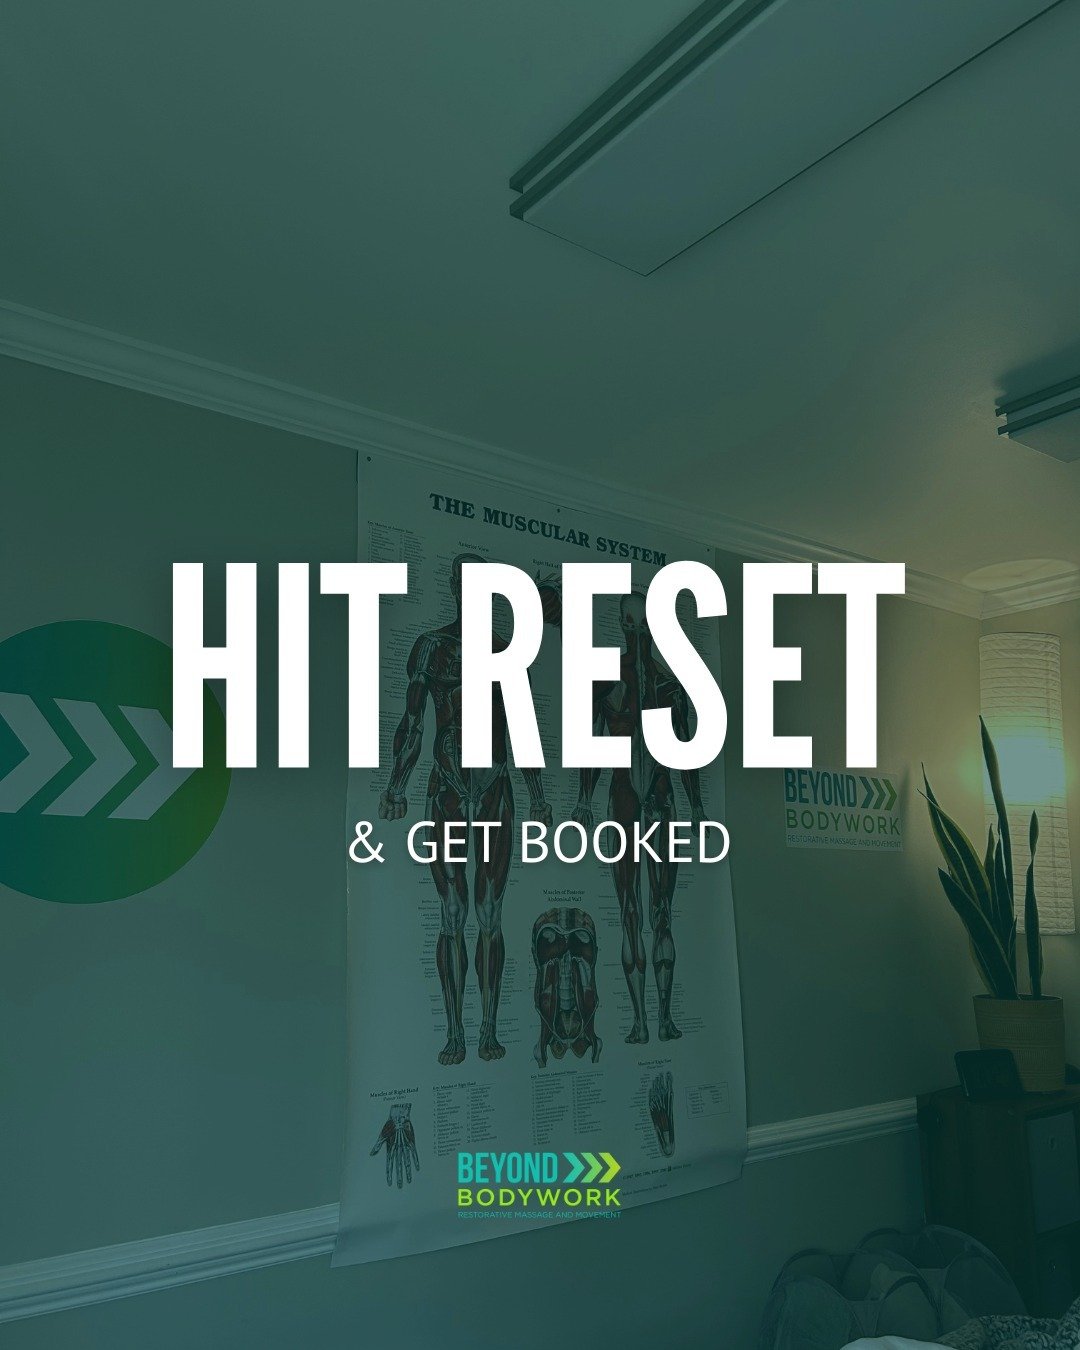 In this space we hit the RESET button on the body.

We&rsquo;re calming down the nervous system, slowly removing tension from our body and figuring out how to progress with movement.

Here to support your recovery &amp; beyond. Get booked! 👋

#cltfi